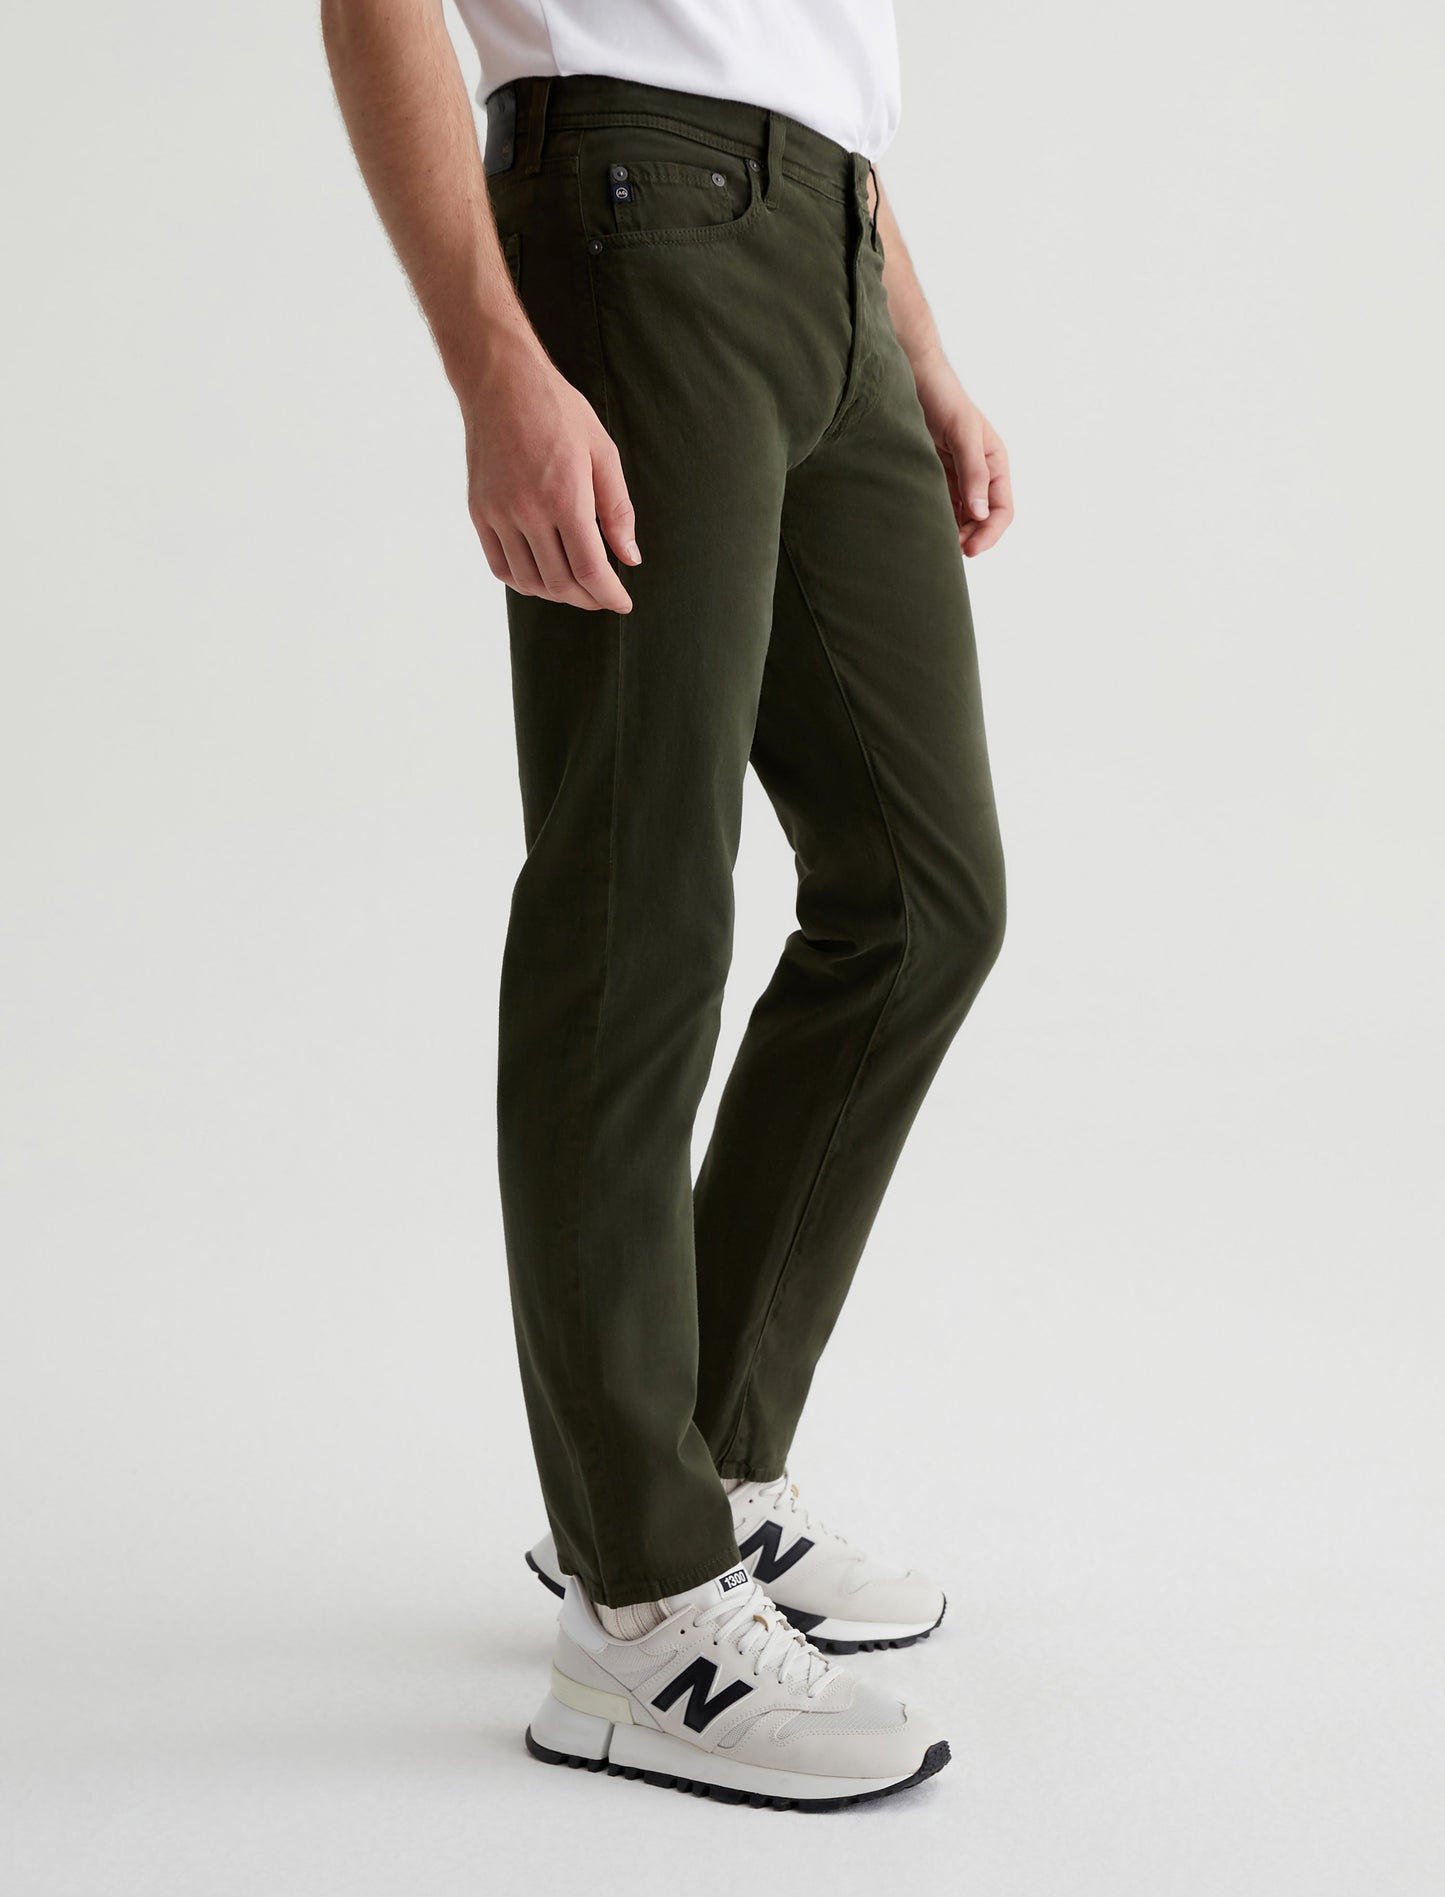 Olive Cigarette Pants for Women Price in Pakistan